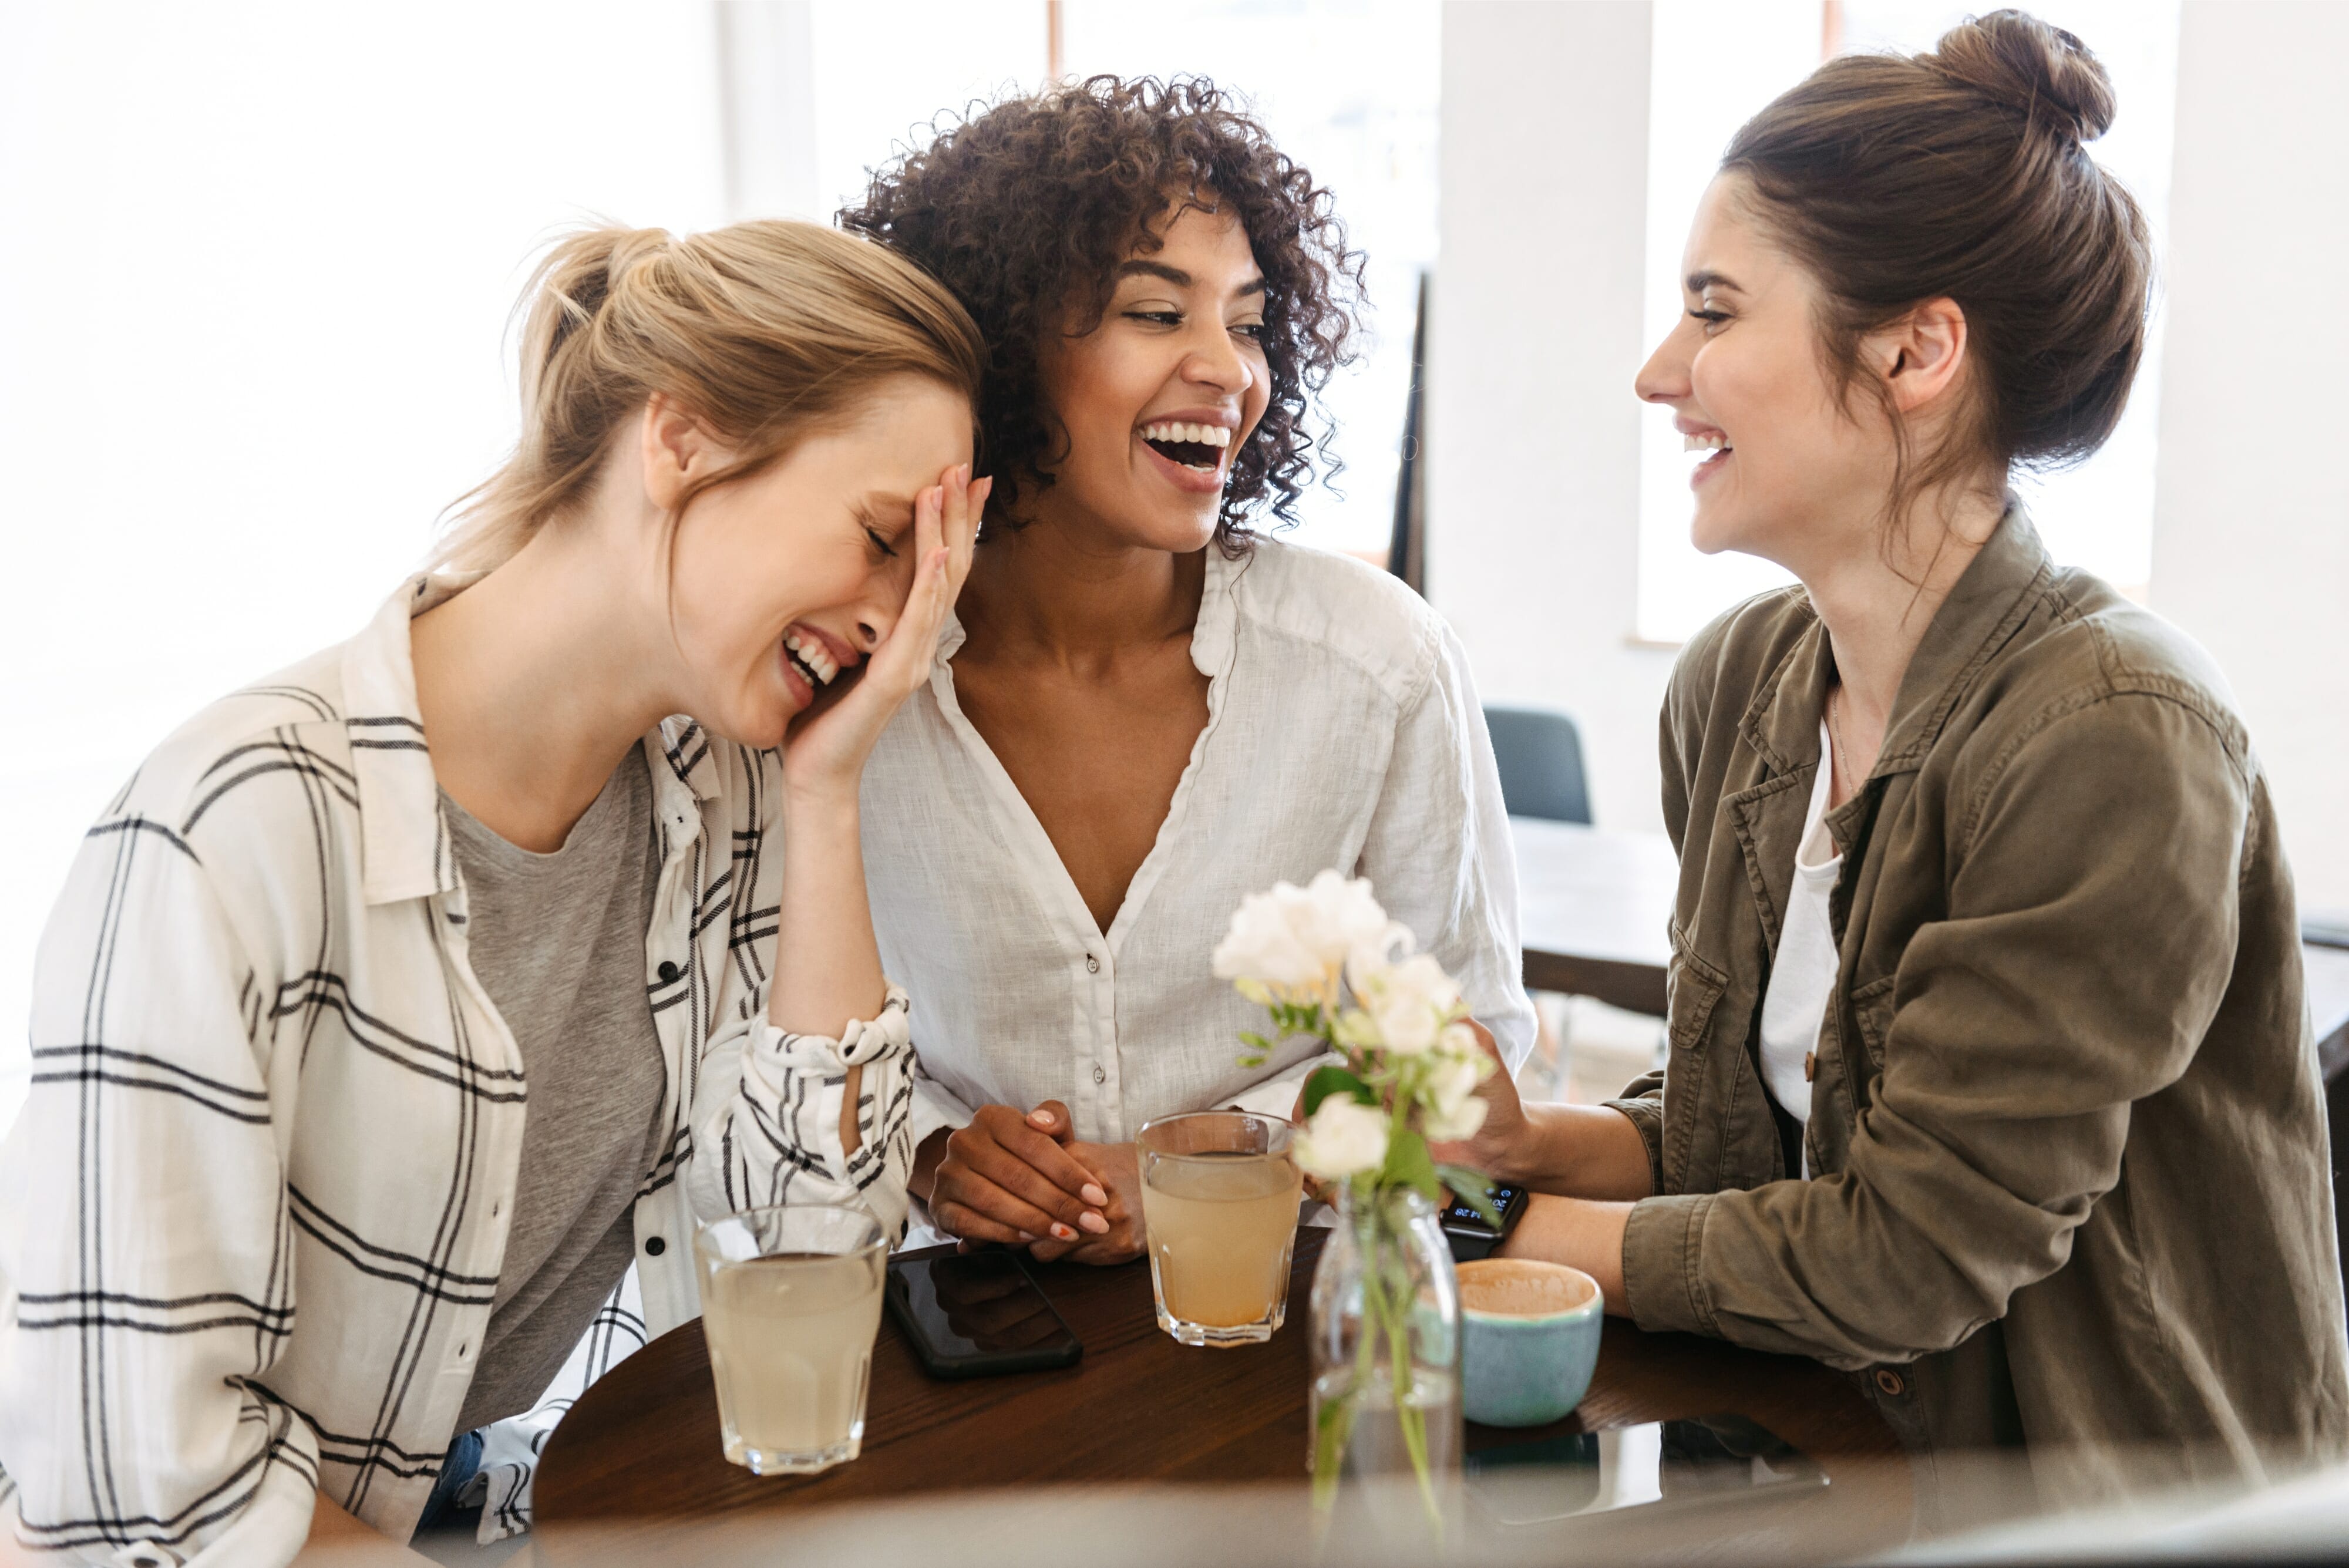 Women laughing at a cafe